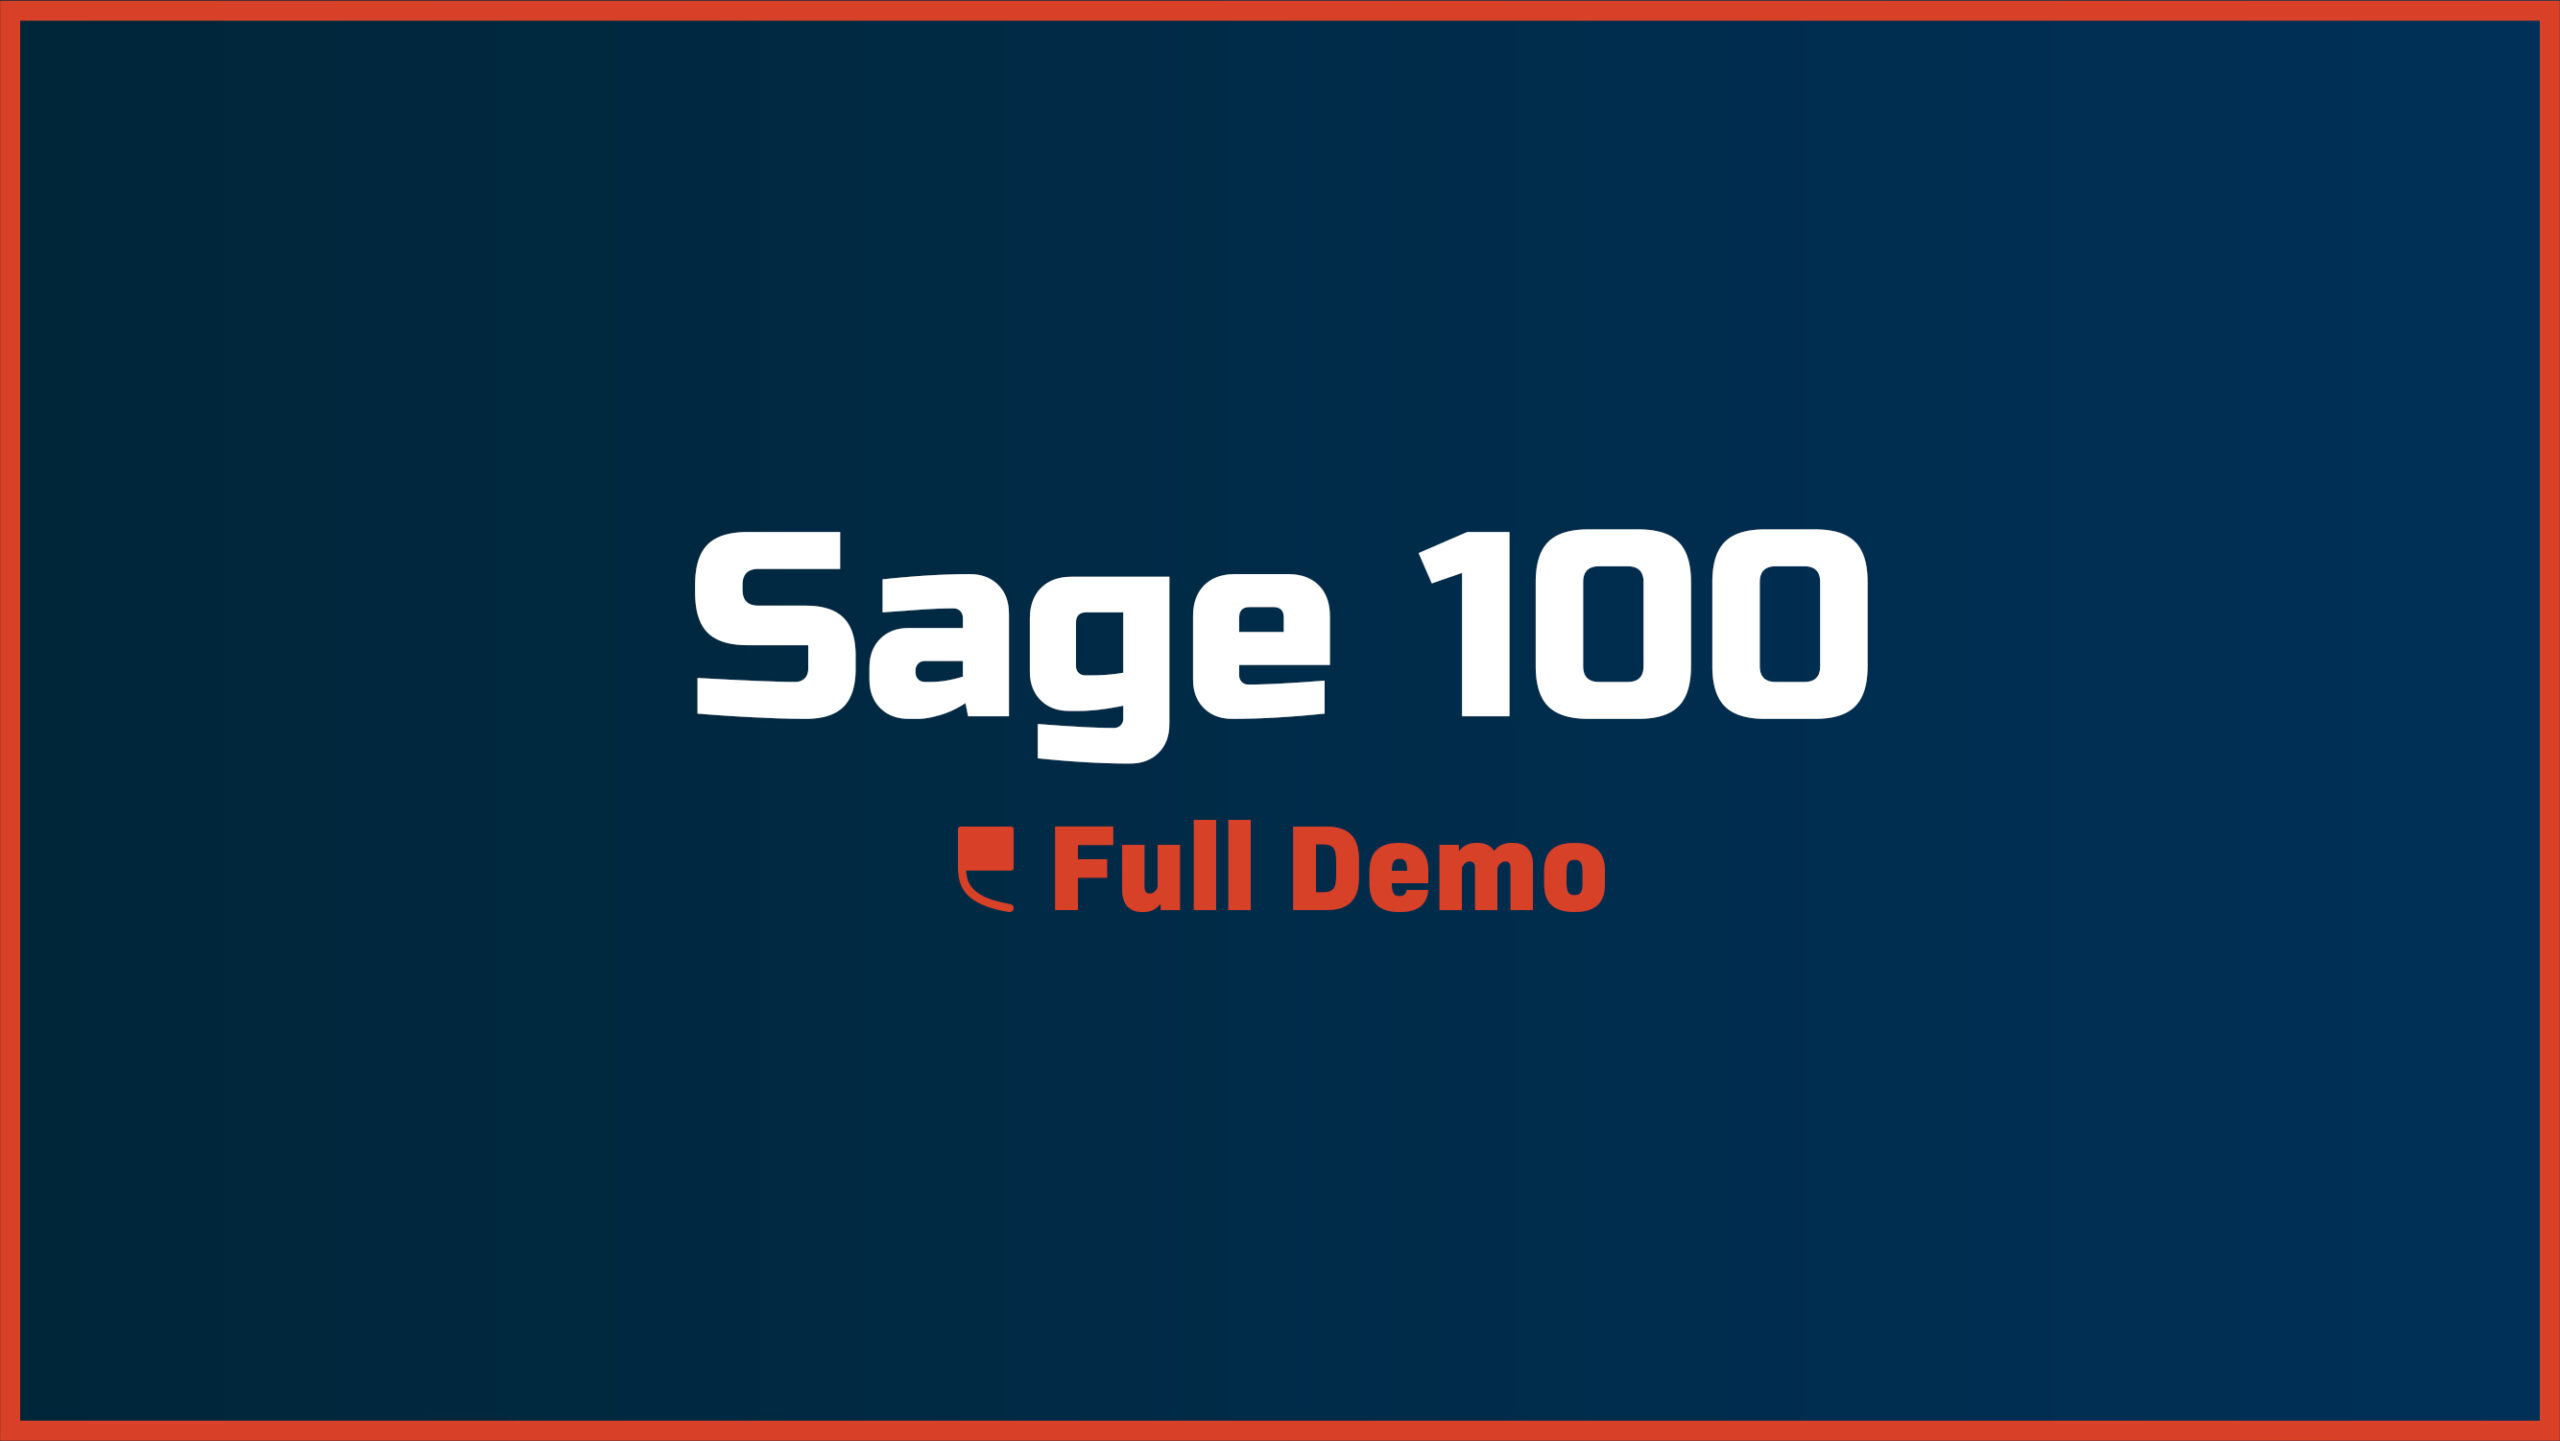 Sage 100 – Full Demo - Featured Image